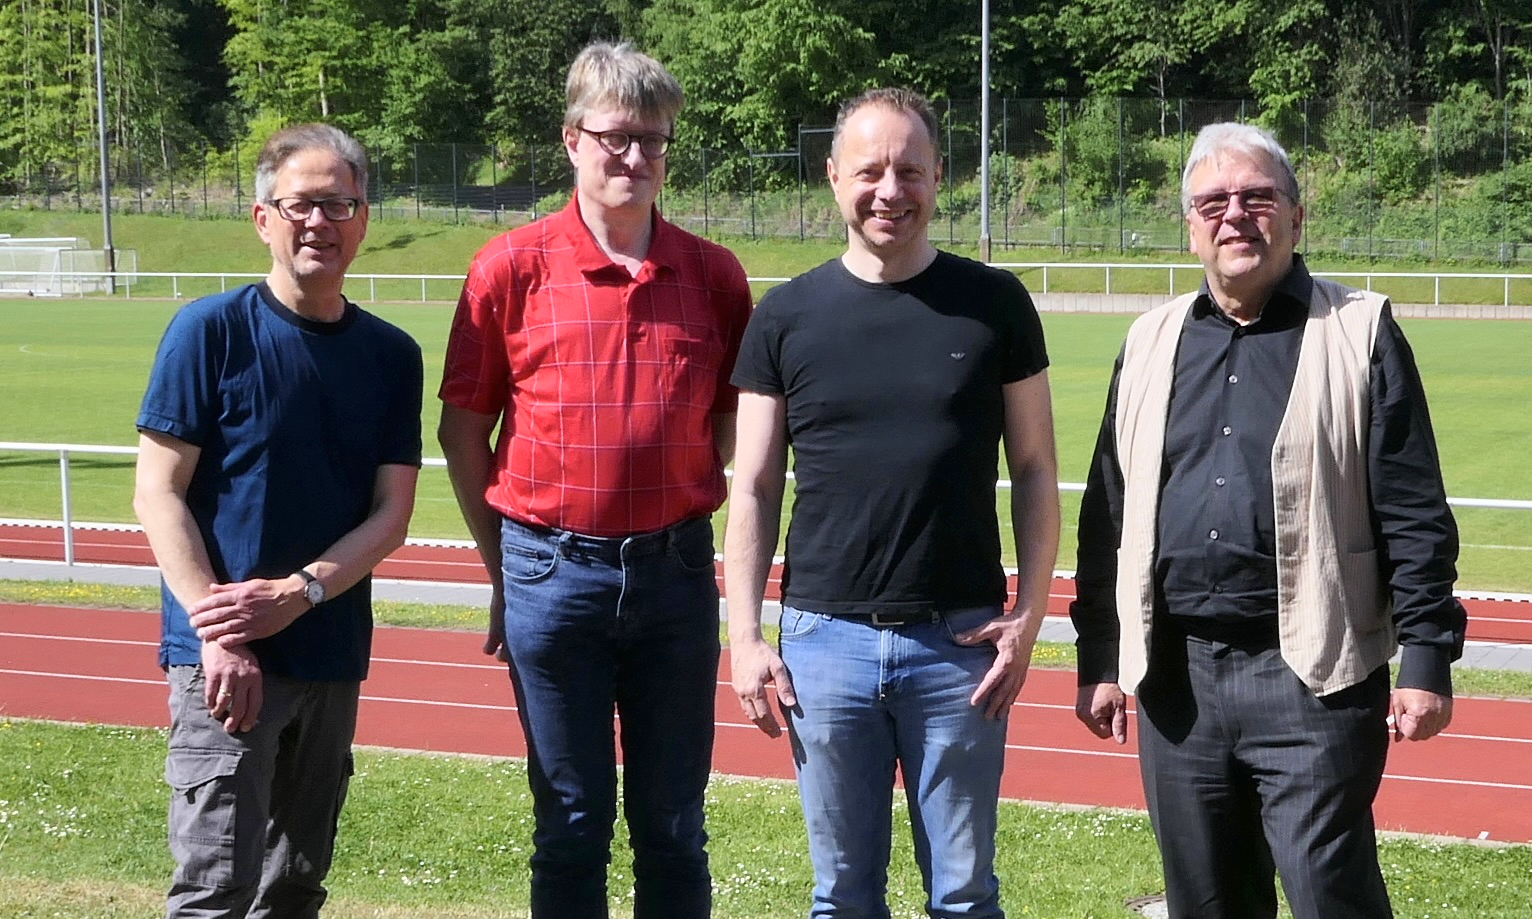 May 2022: the new board of ArGe Baltikum (from left to right): Martin Bechstedt (Vice-Chairman), Torsten Berndt (Chairman), Michael Haslau (Treasurer), Friedhelm Doell (Webmaster and Corporate Designer)